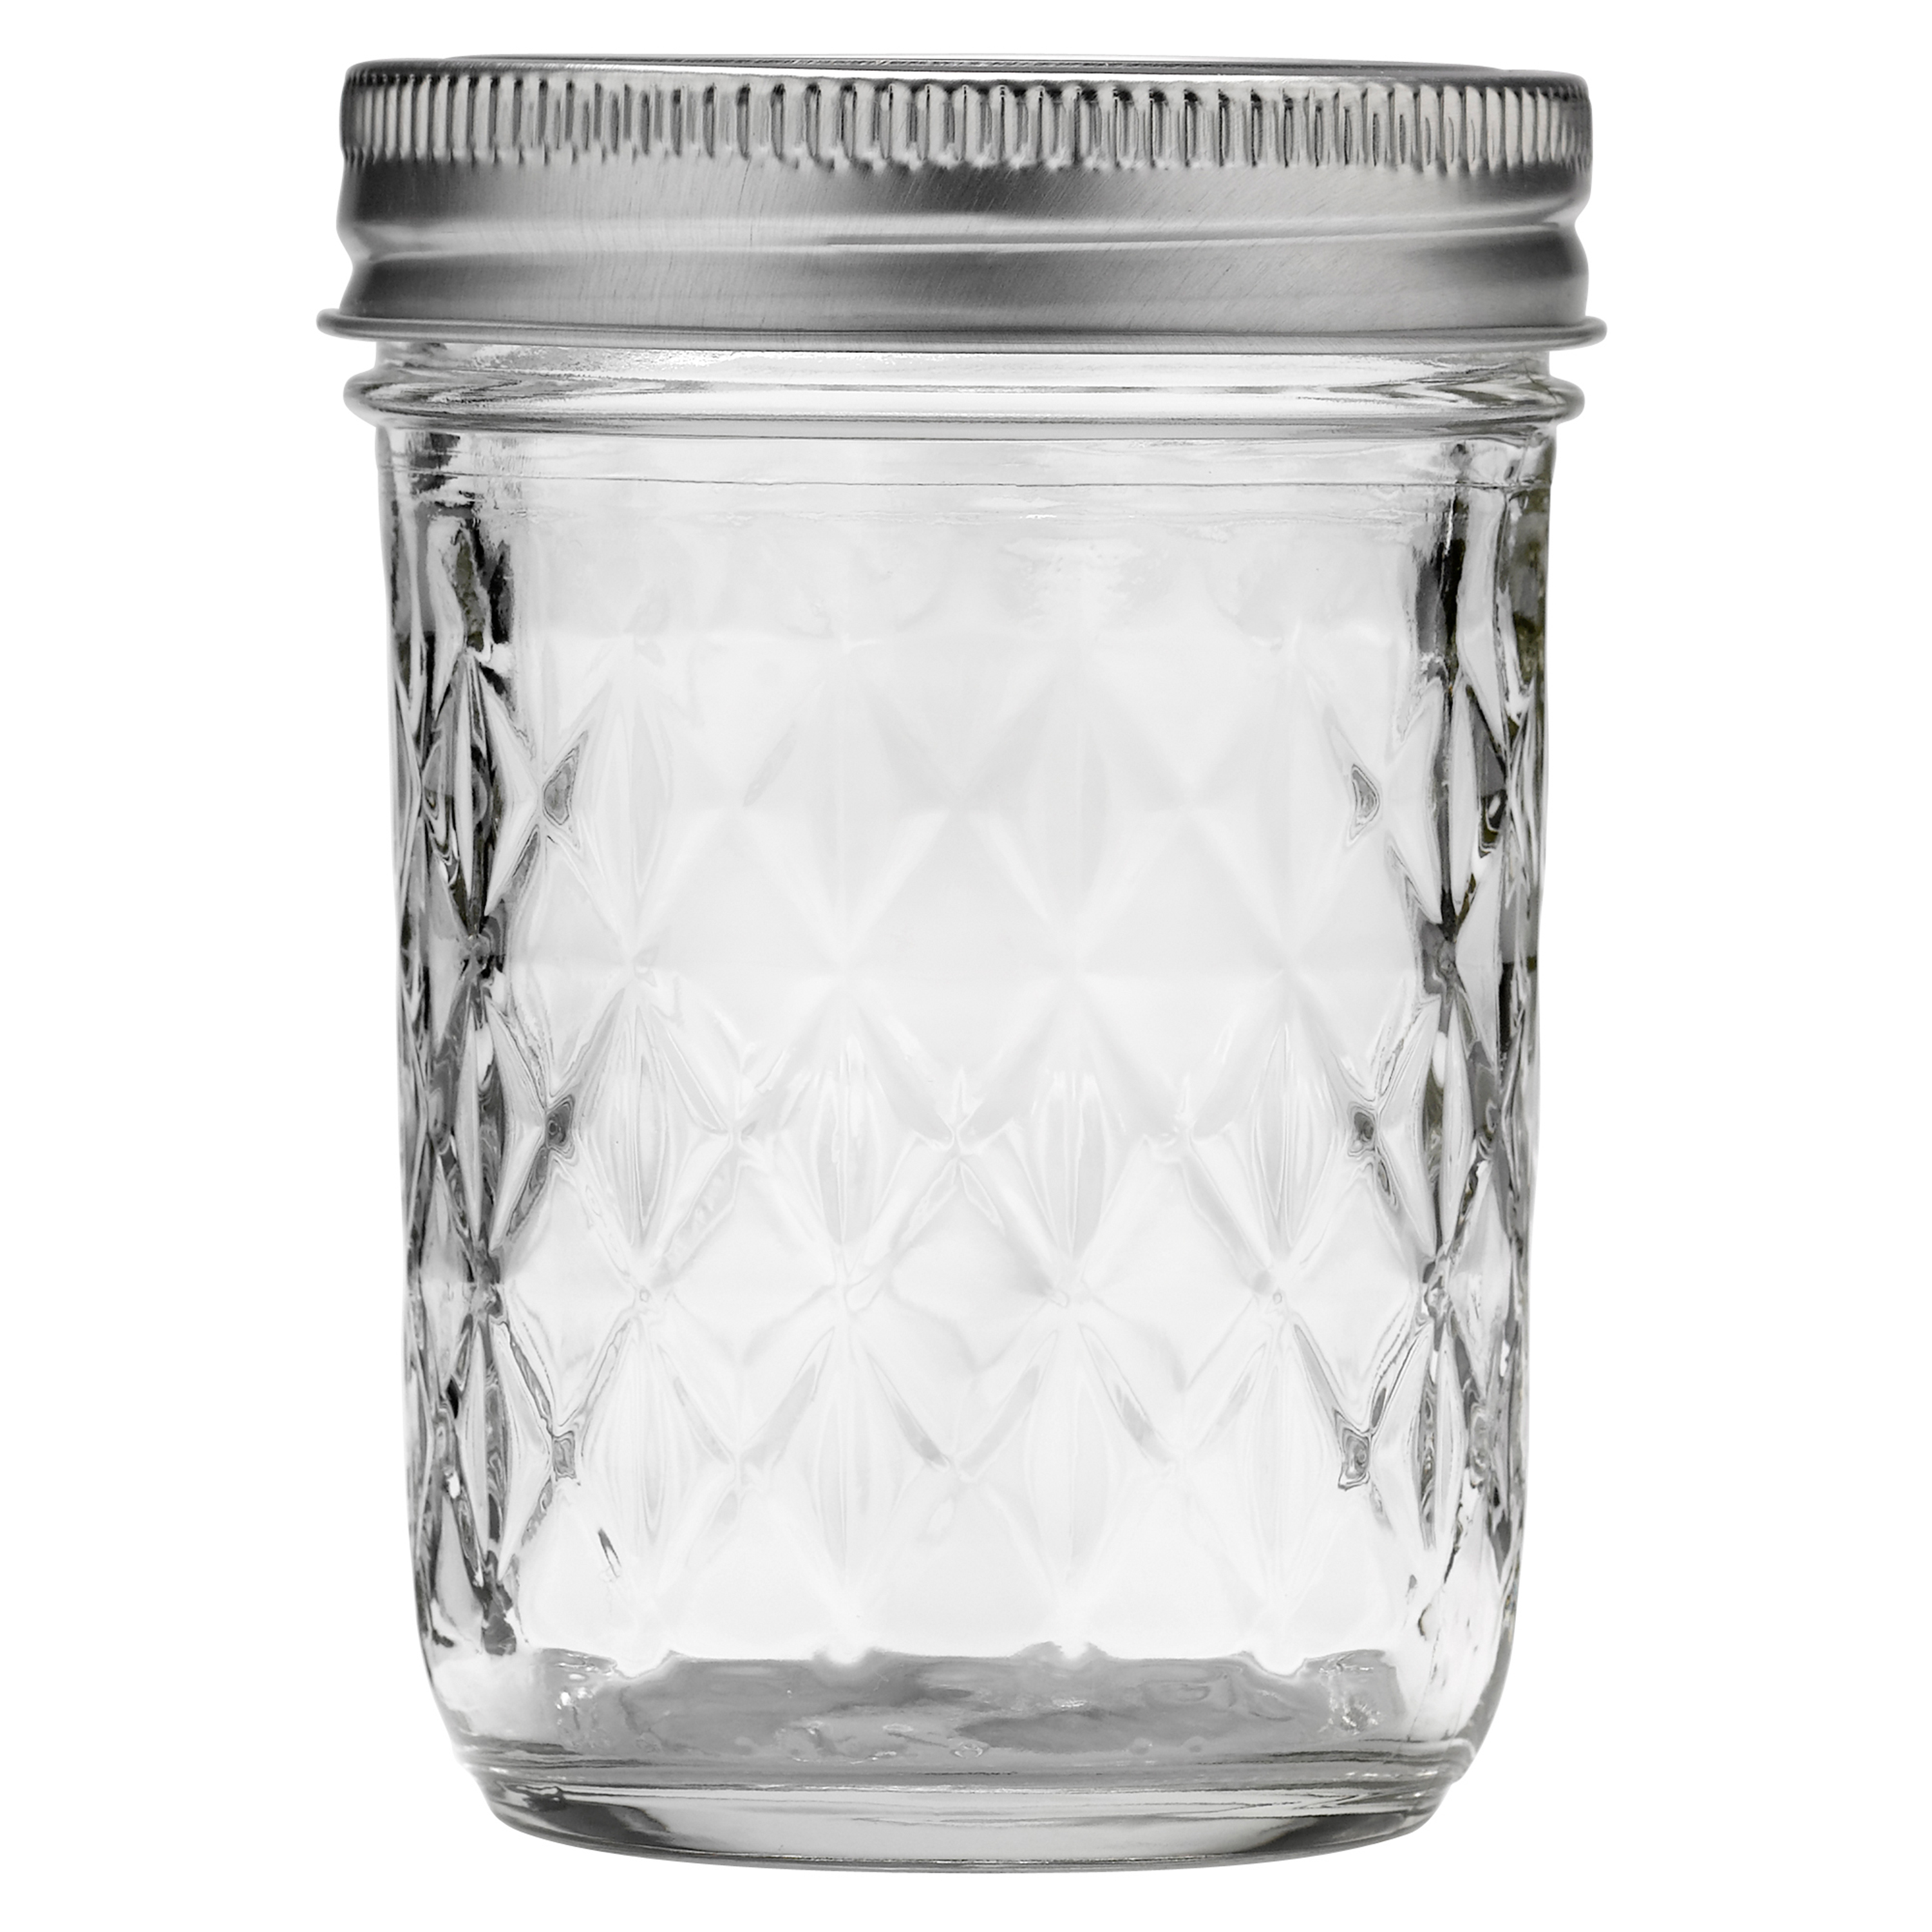 Ball Quilted Crystal Jelly Jar with Lid and Band, Regular Mouth, 8 oz, 12 Count - image 2 of 6